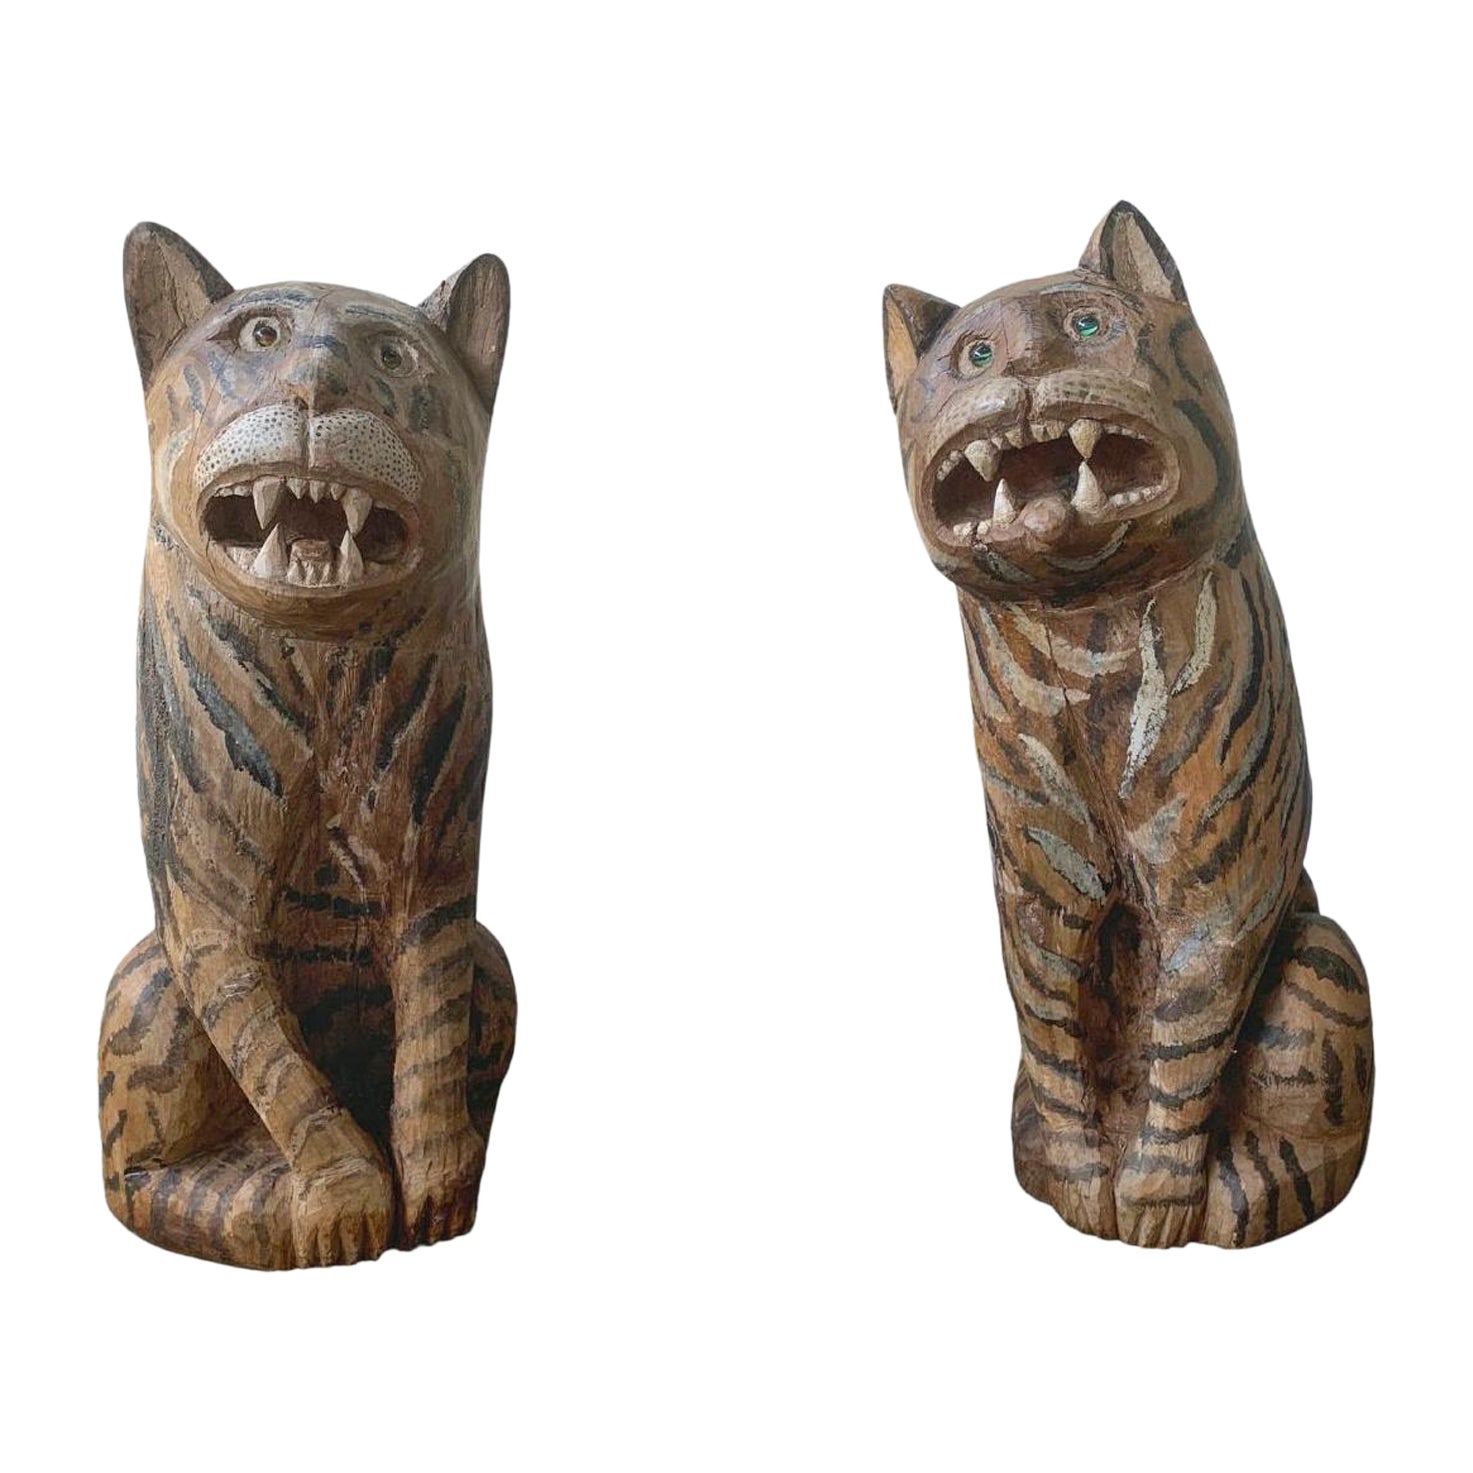 Pair of Vintage Hand-Crafted Tiger Sculpture / Statue from Java, Indonesia 